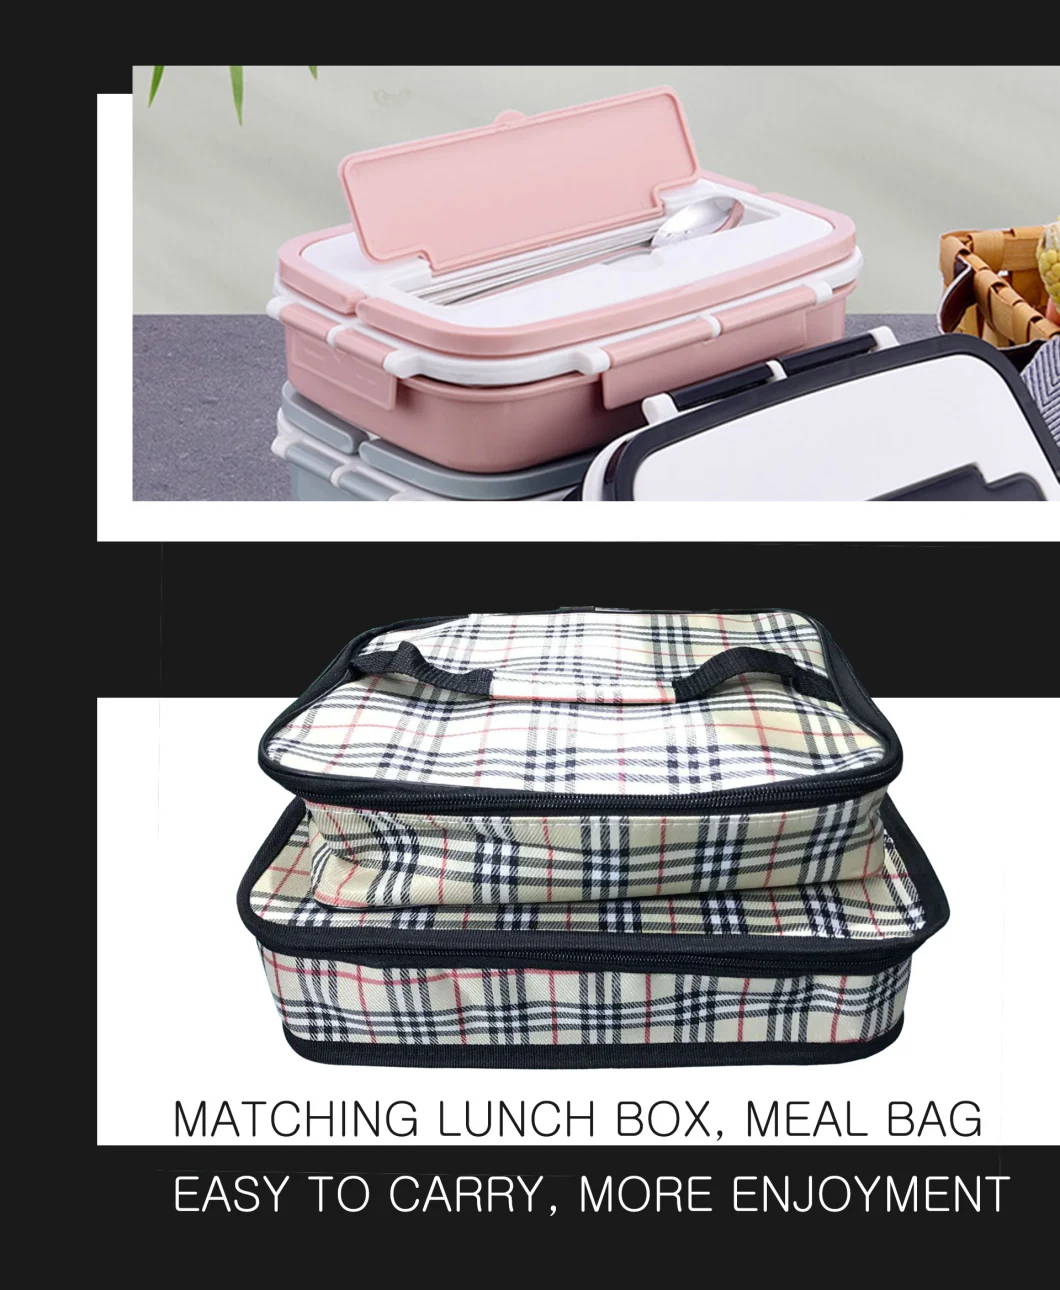 Food Grade 304 Stainless Steel Tableware for Lunch Box